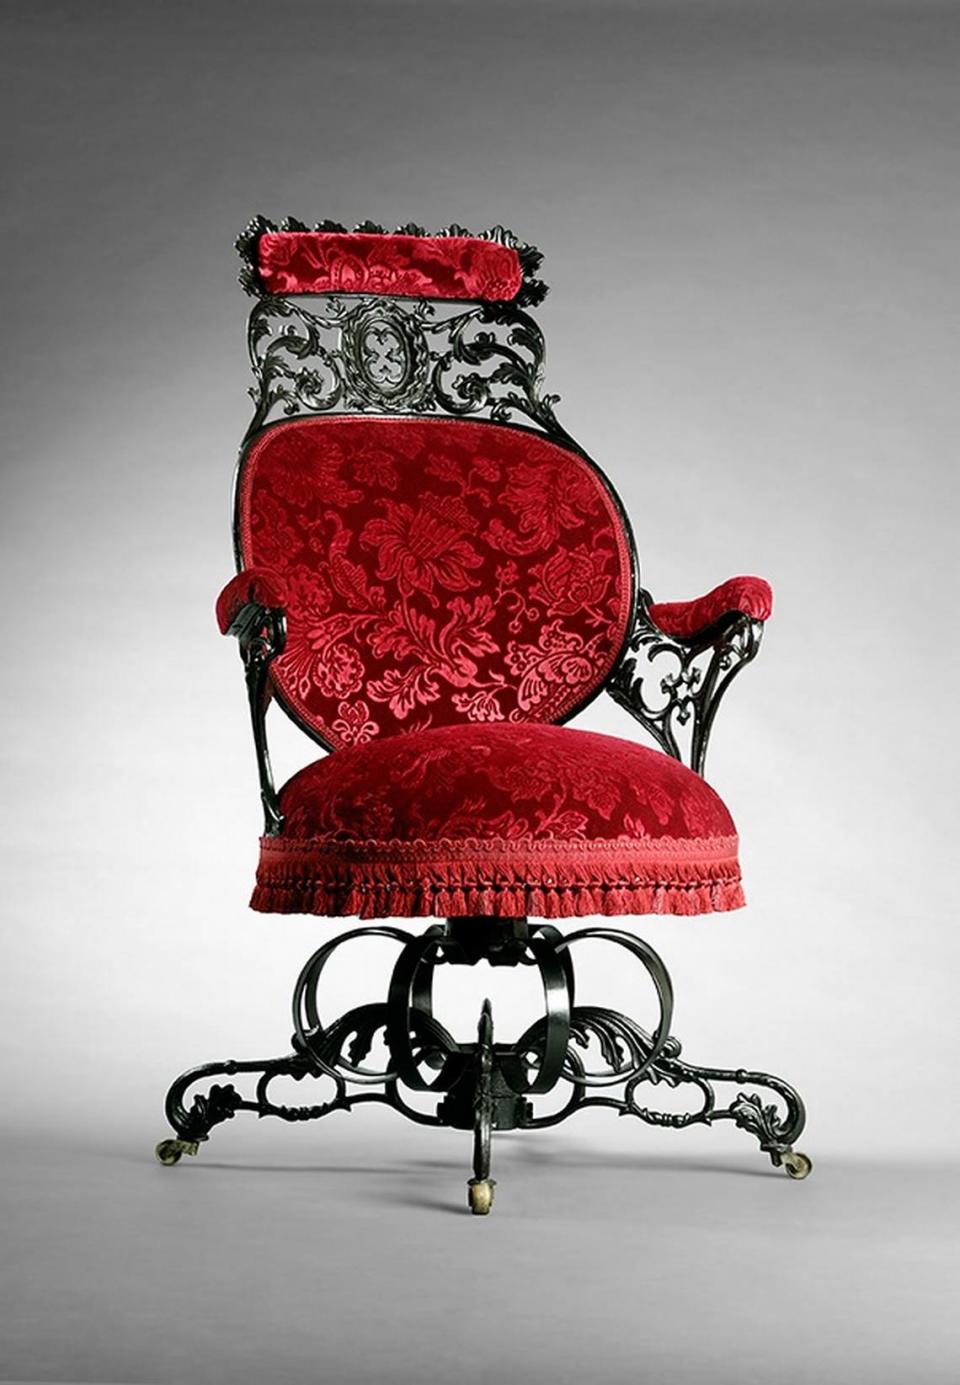 Thomas E. Warren (American, 1808, active 1849-53), American Chair Company (United States, 1829-58). Centripetal Spring Arm Chair, circa 1850, cast iron, steel, wood, sheet metal, reproduction gauffrage velvet upholstery, faux bois rosewood, metal casters. The Mint’s chairs exhibit runs from Sept. 16 to Feb. 25, 2024.